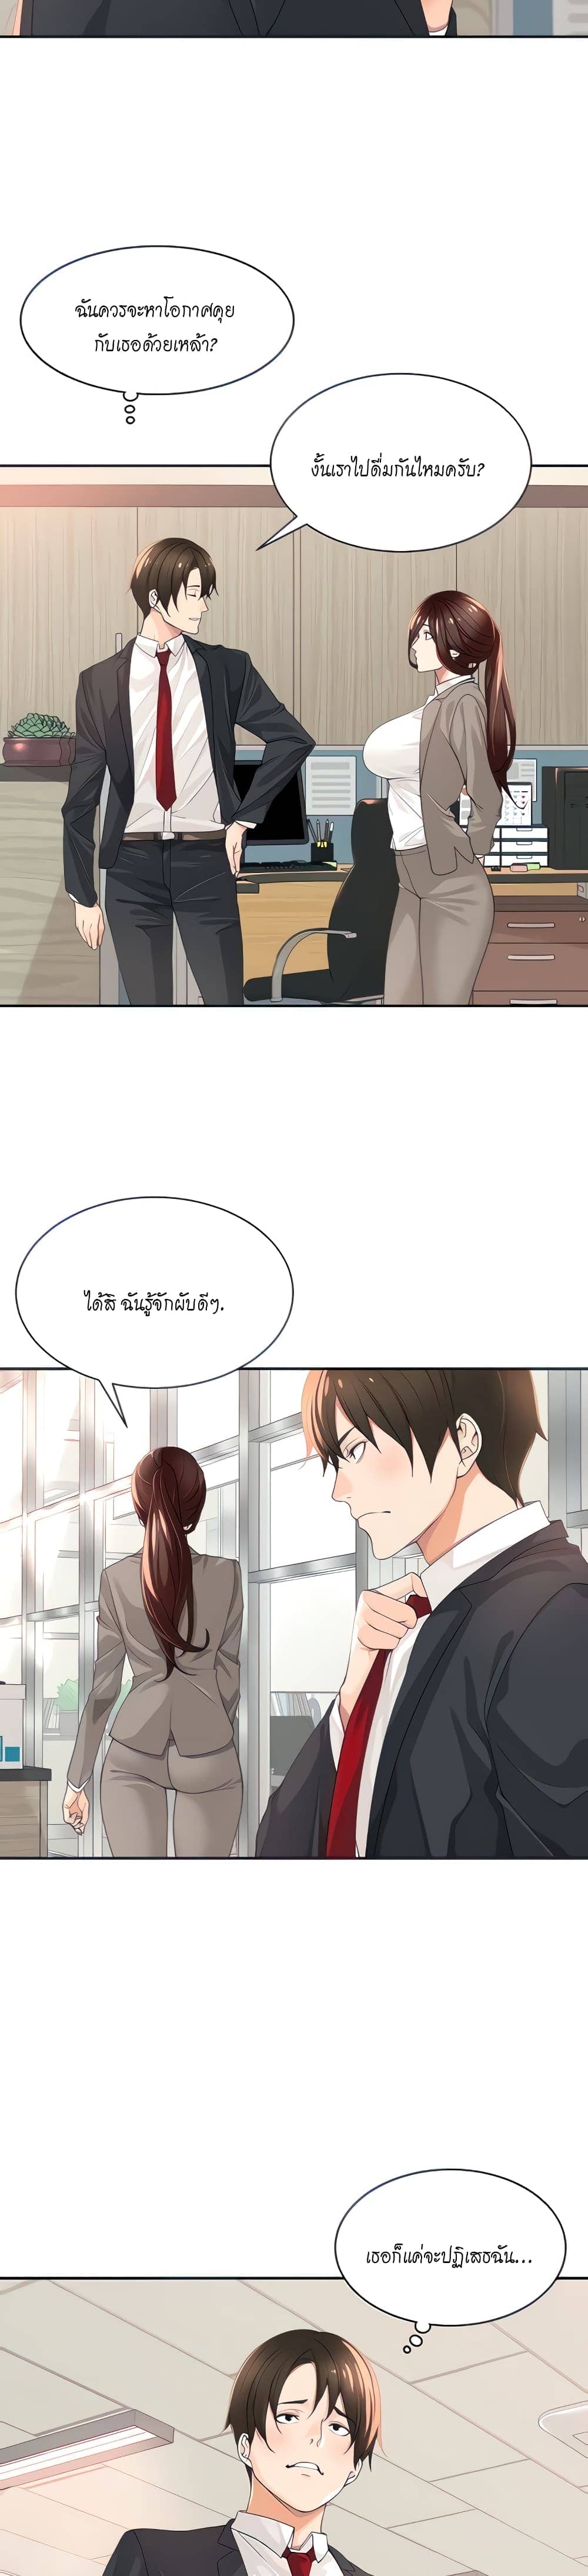 Manager, Please Scold Me ตอนที่ 2 ภาพ 2